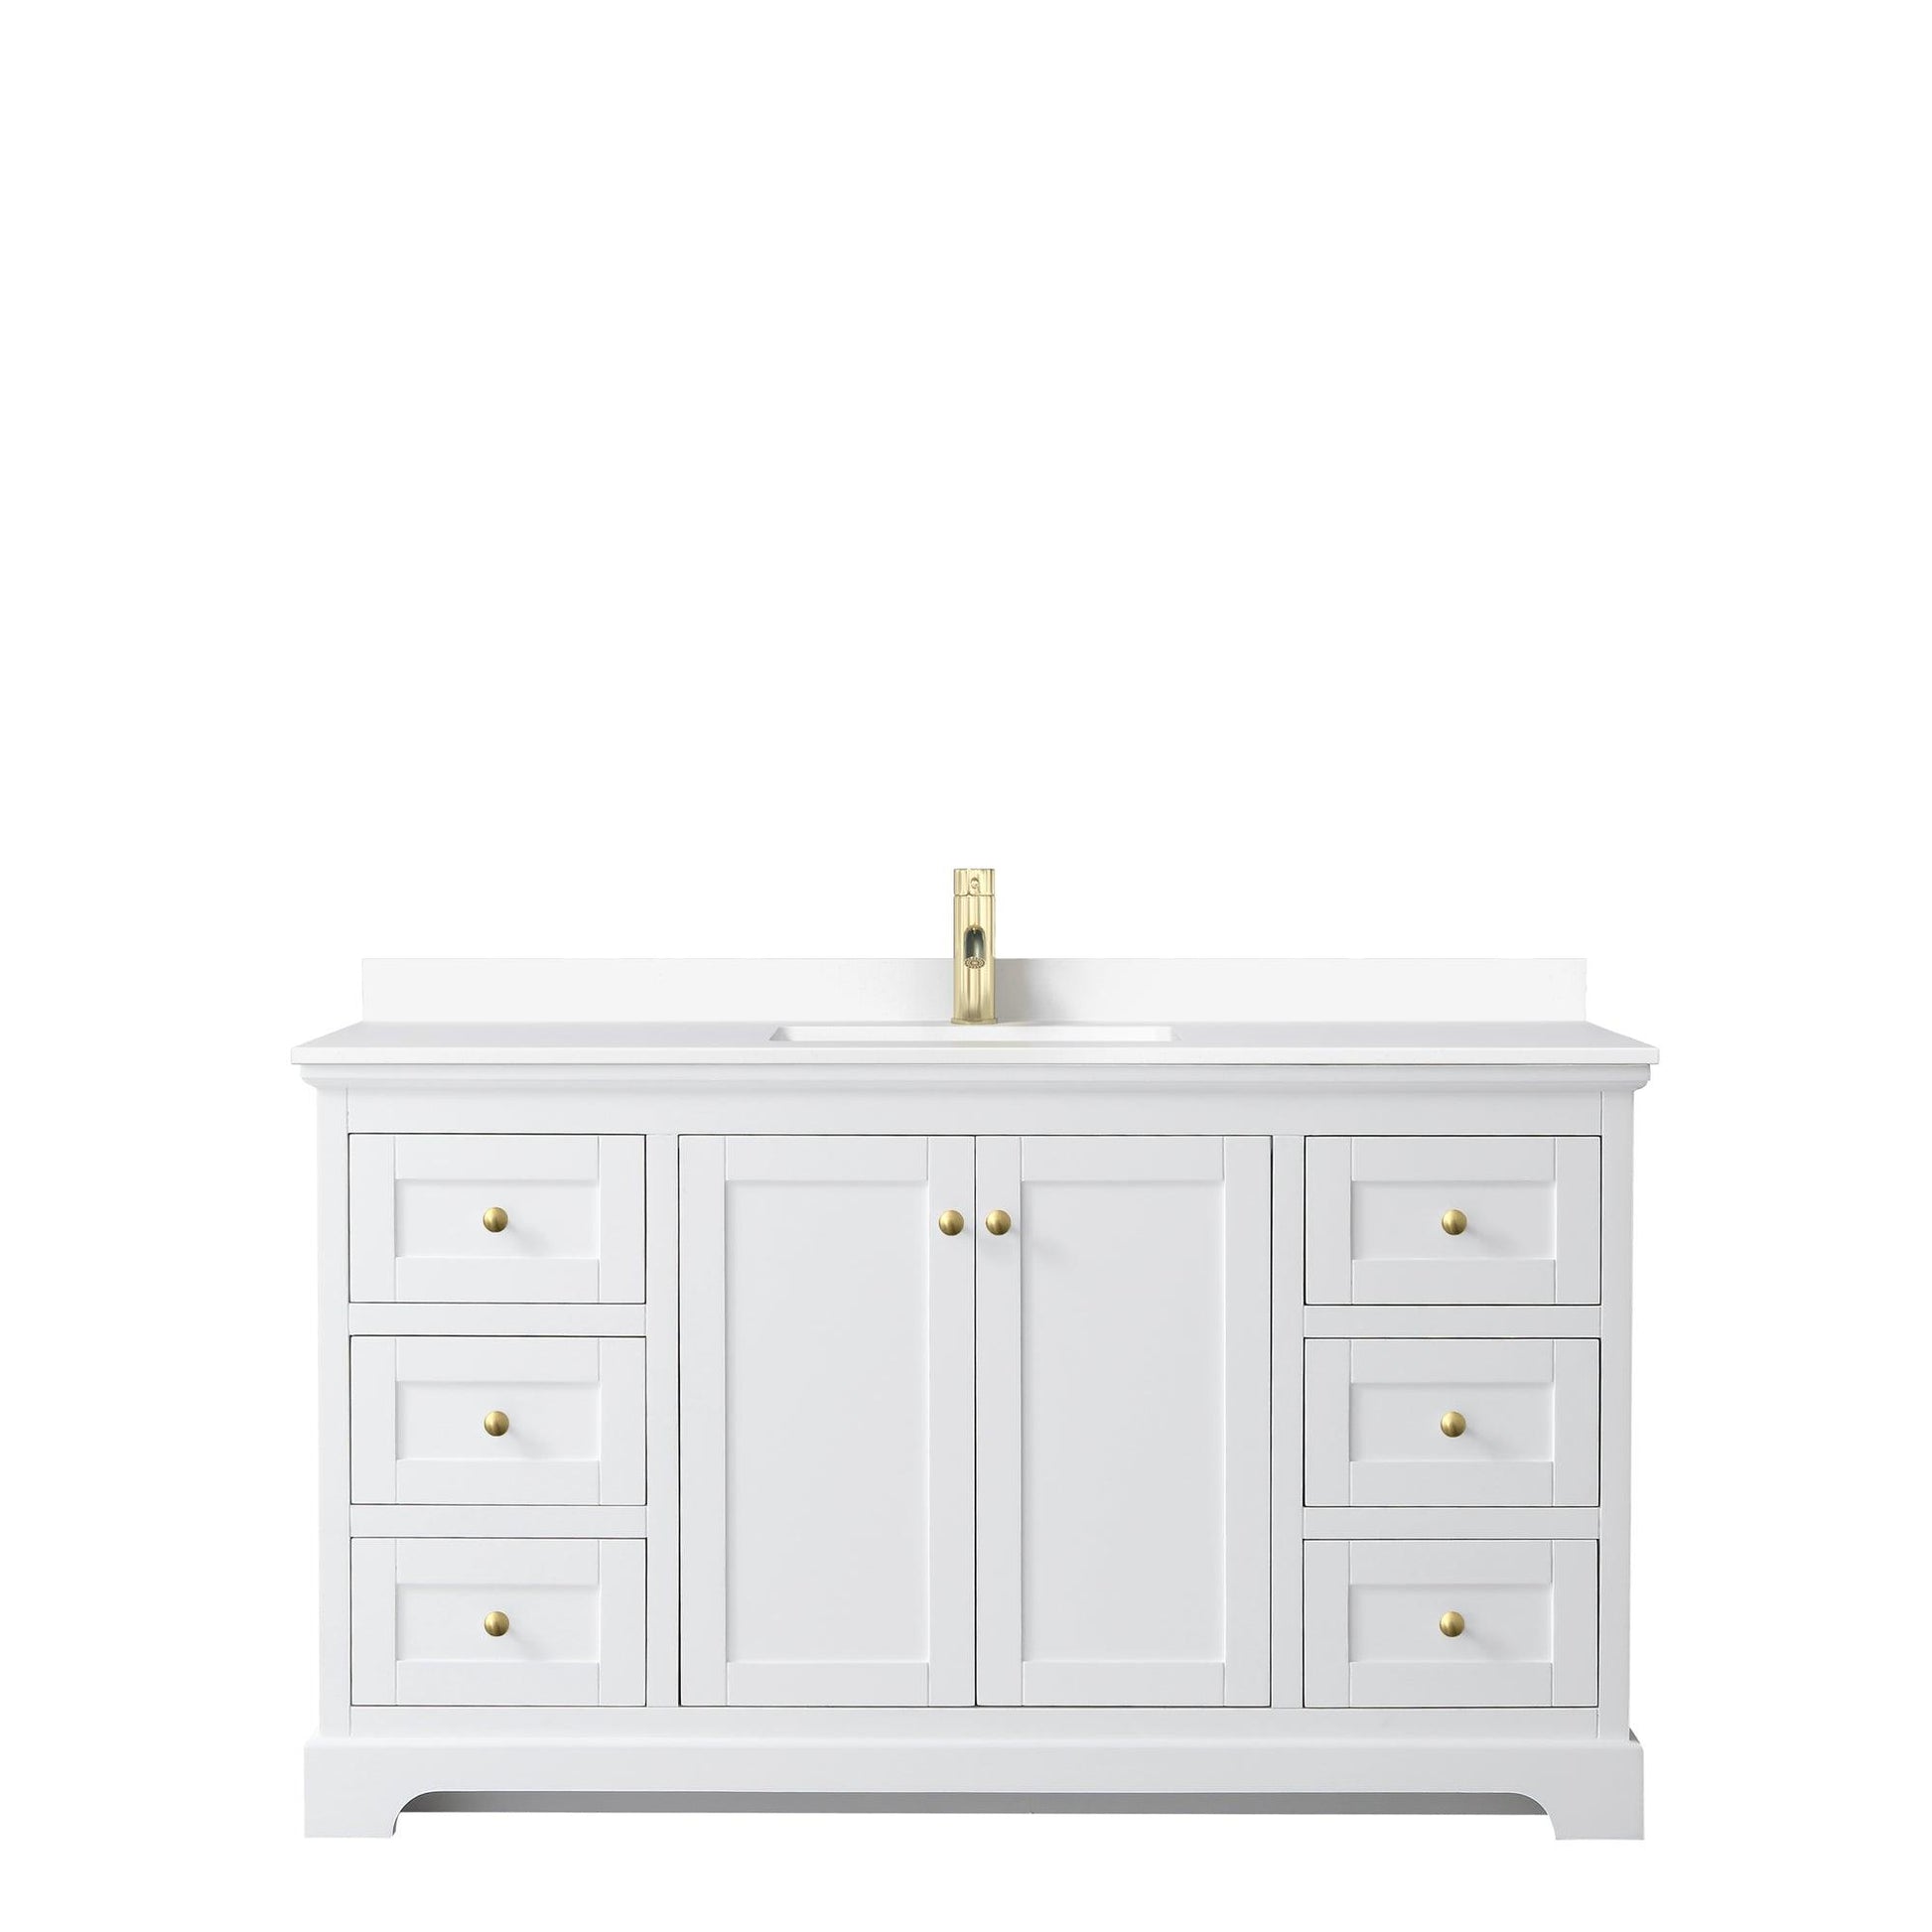 
  
  Wyndham Collection Avery Single Bathroom Vanity in White, White Cultured Marble Countertop, Undermount Square Sink, Optional Mirror, Brushed Gold Trim
  
